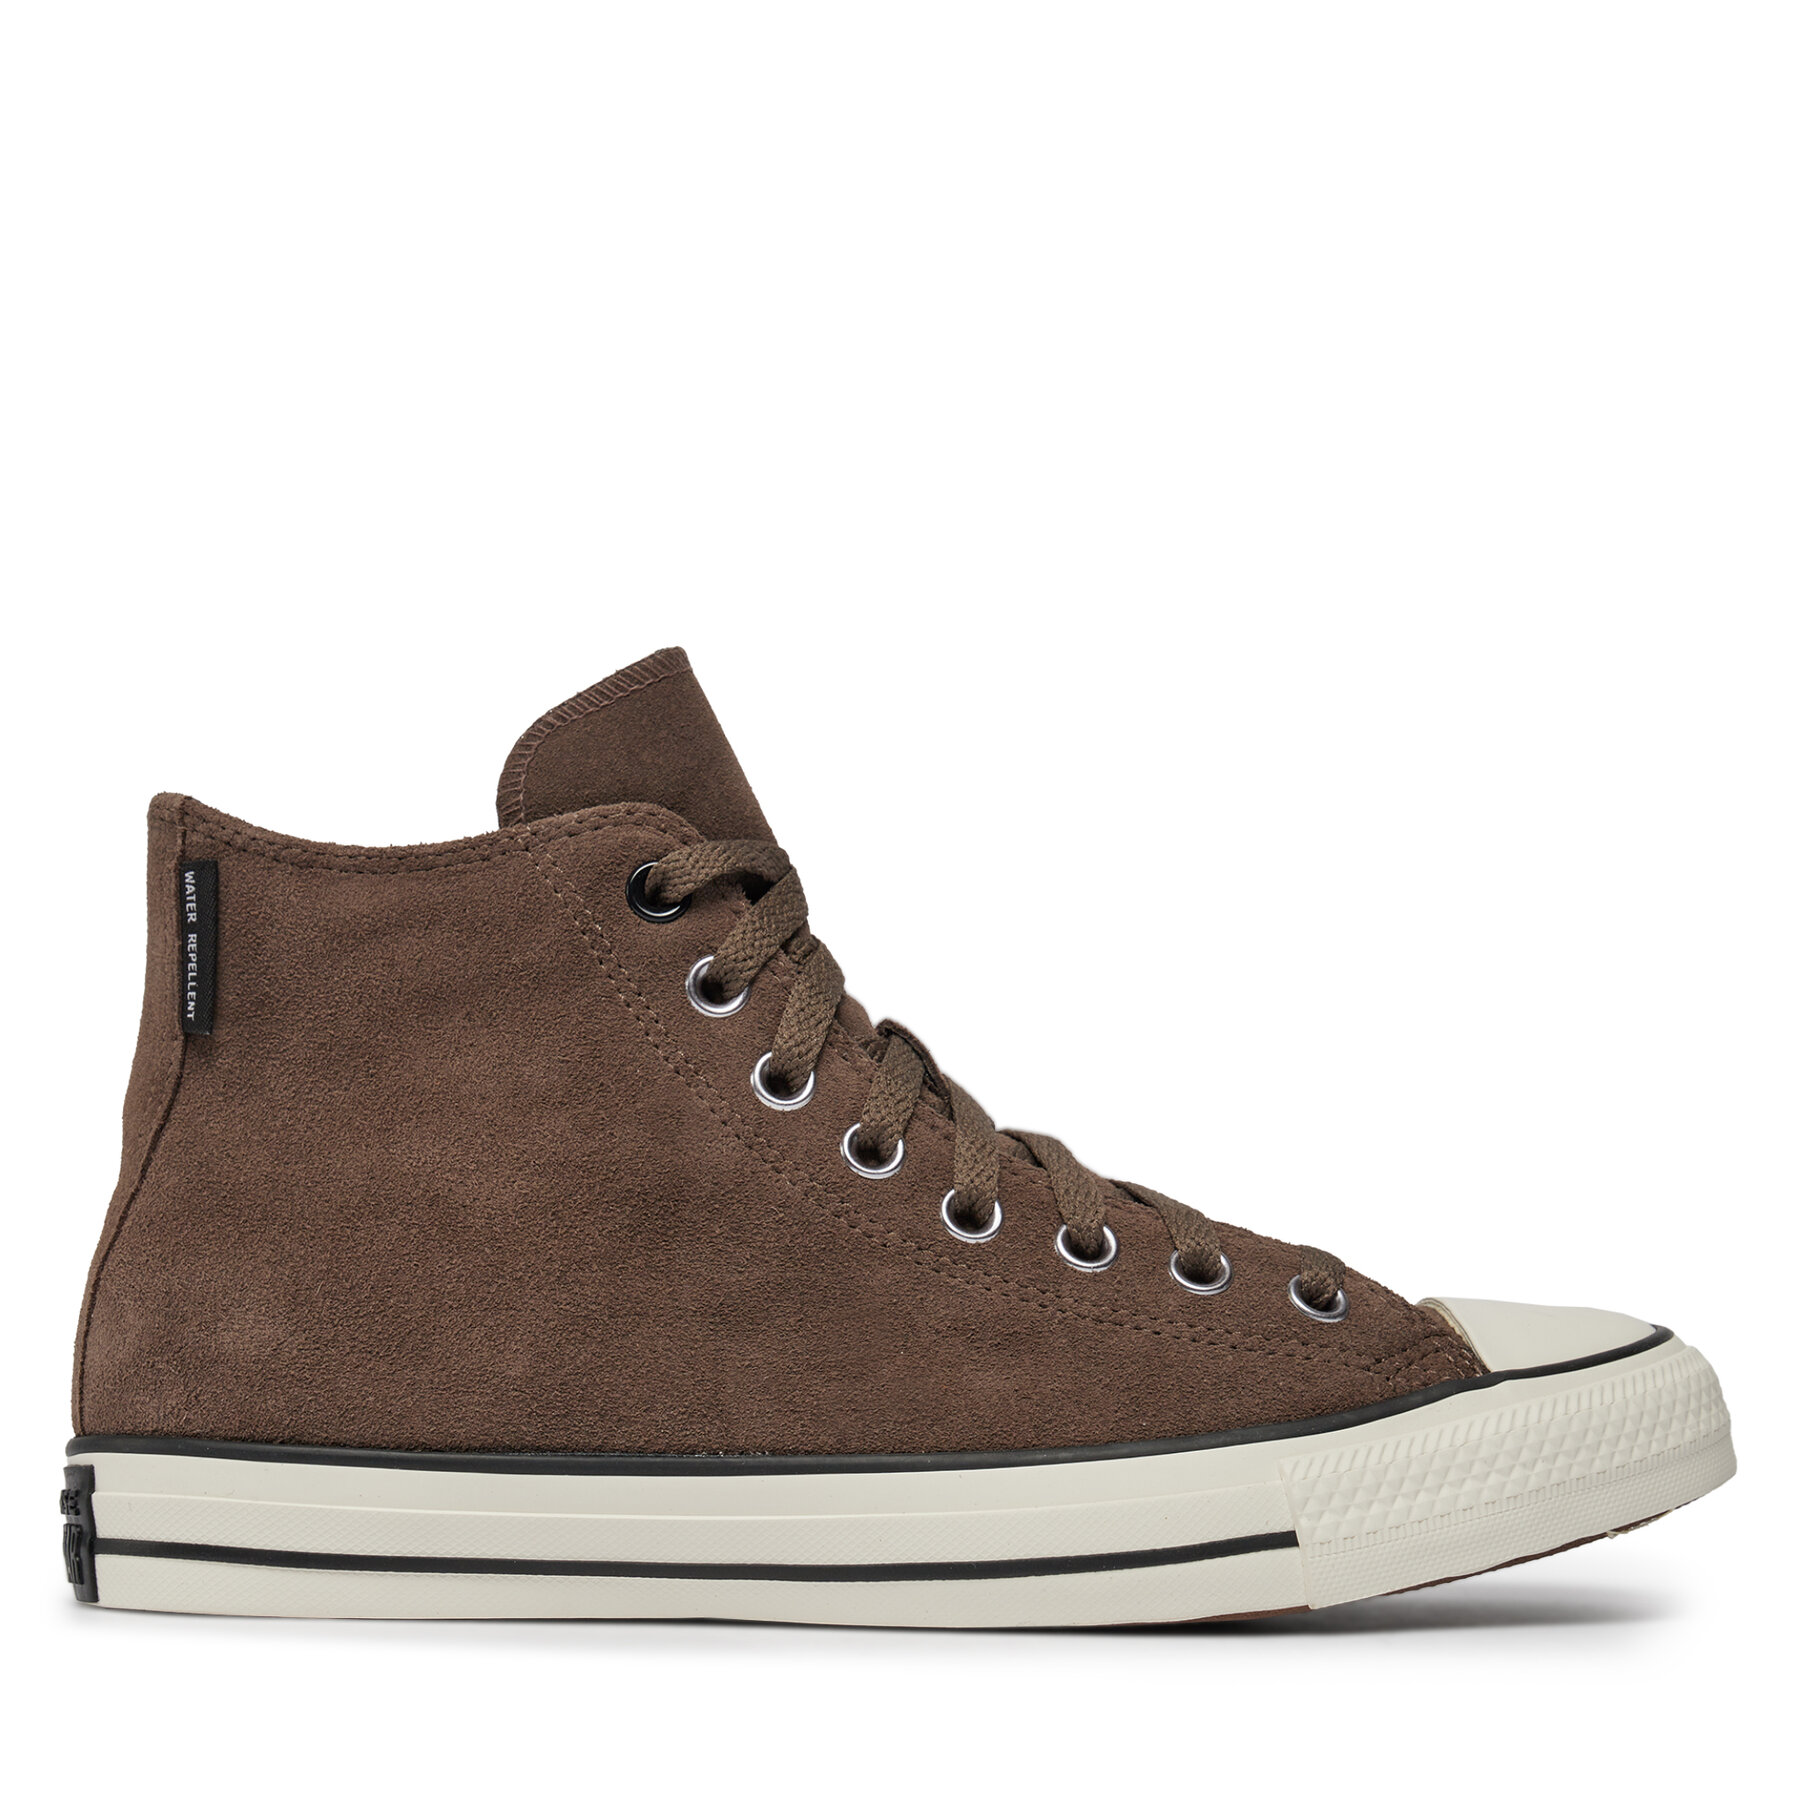 Sneakers aus Stoff Converse Chuck Taylor All Star A05372C Taupe von Converse